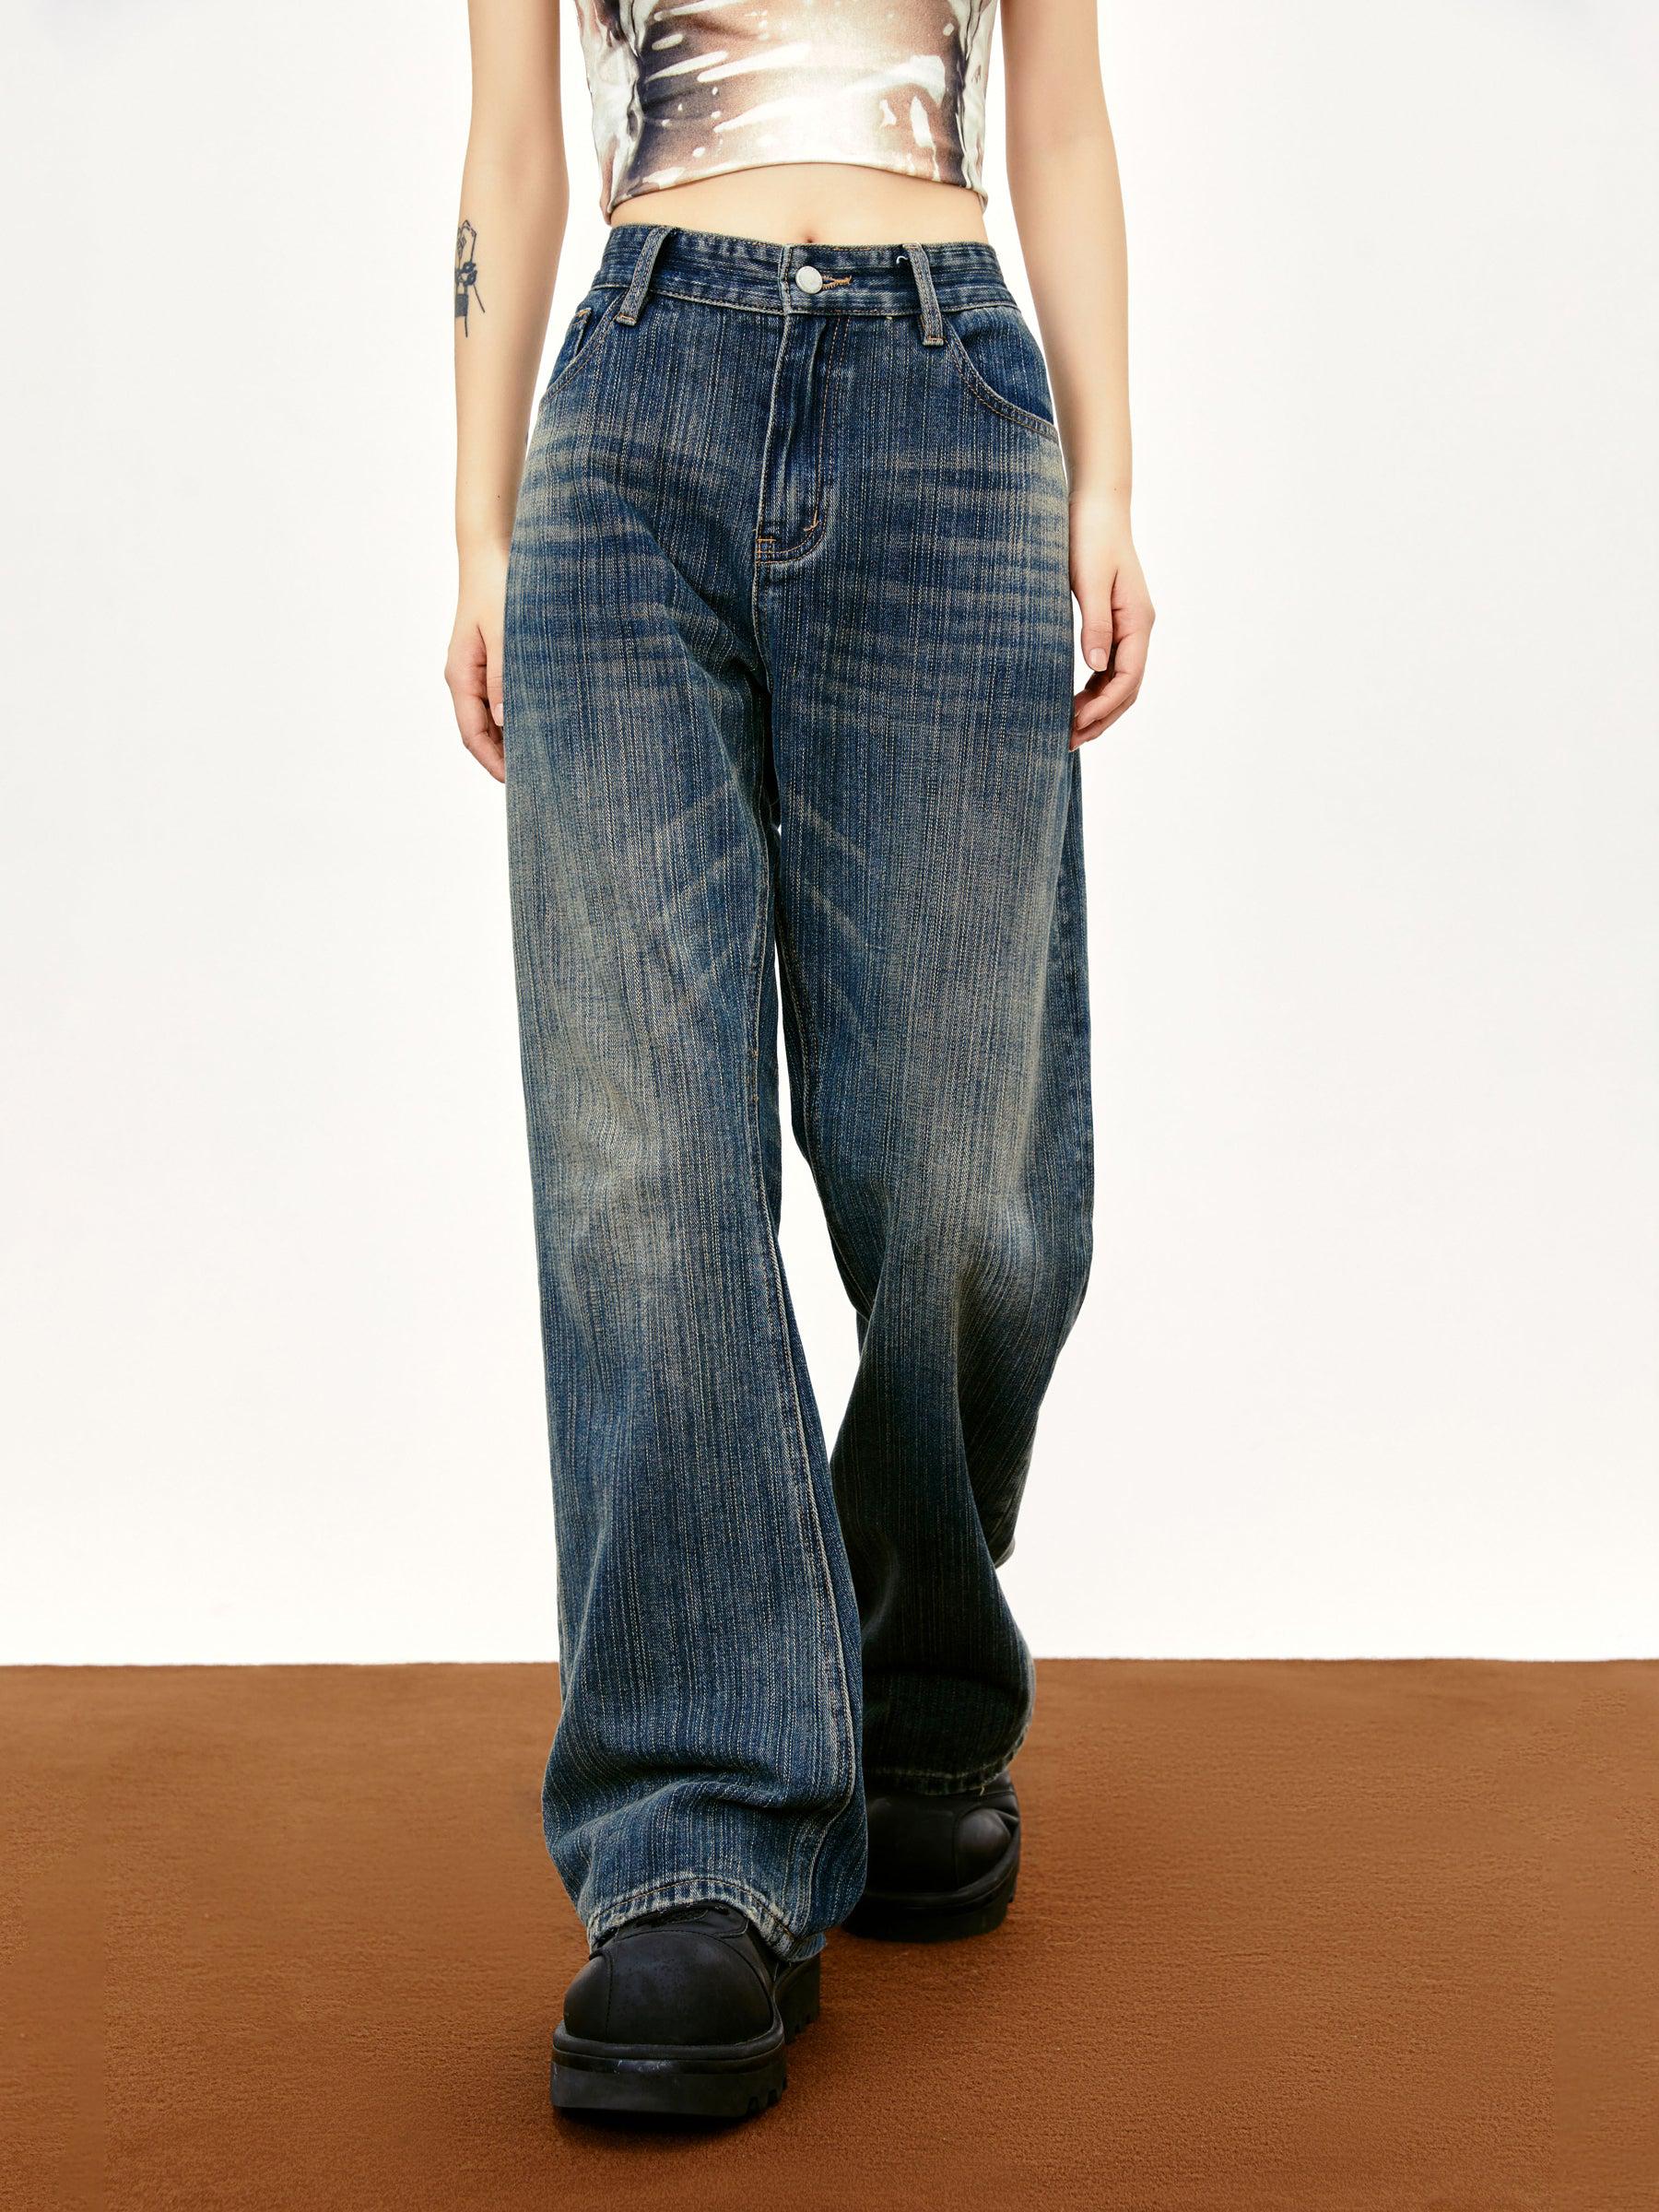 Classic Washed & Whisker Flare Leg Jeans